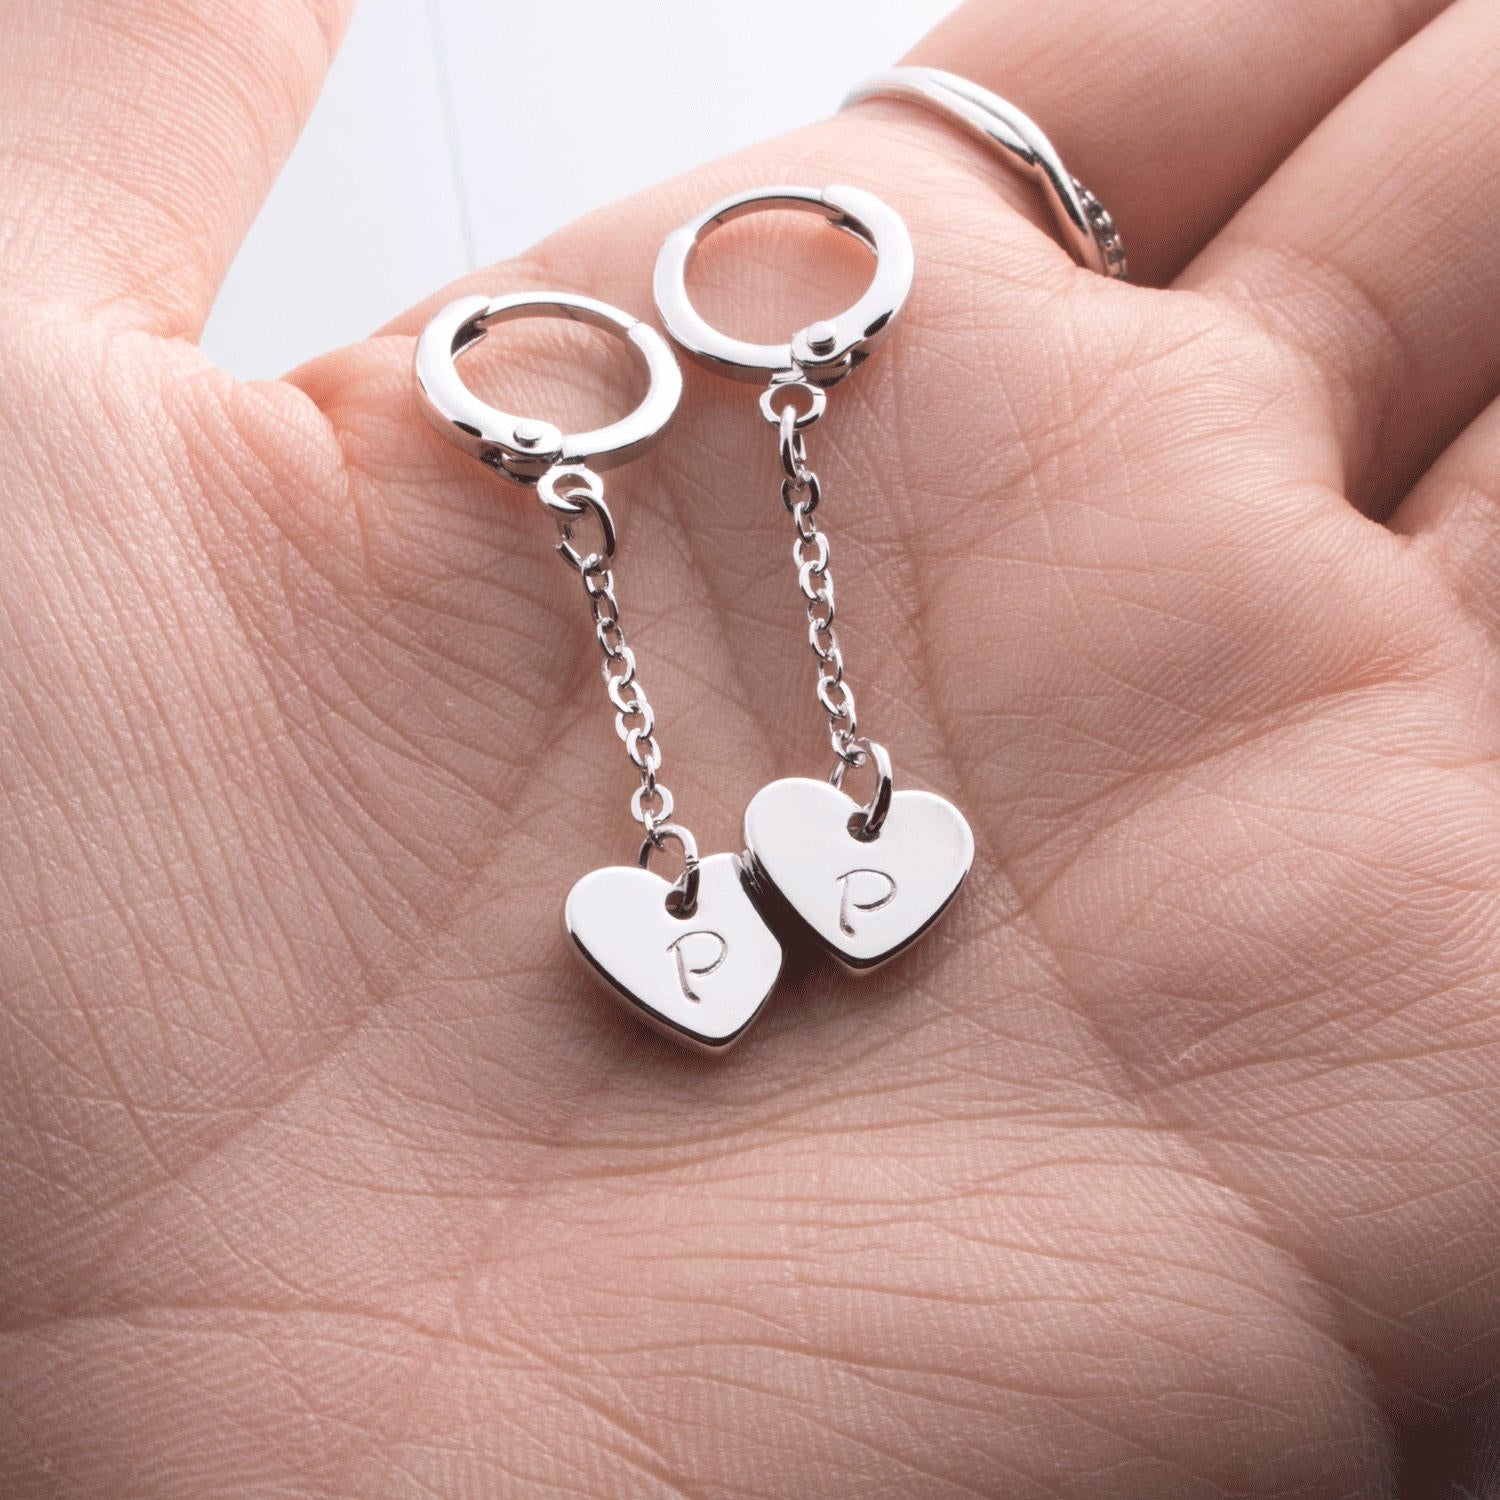 Buy Personalized Heart Clip Initial Earrings - Customized Jewelry at Petite Boutique